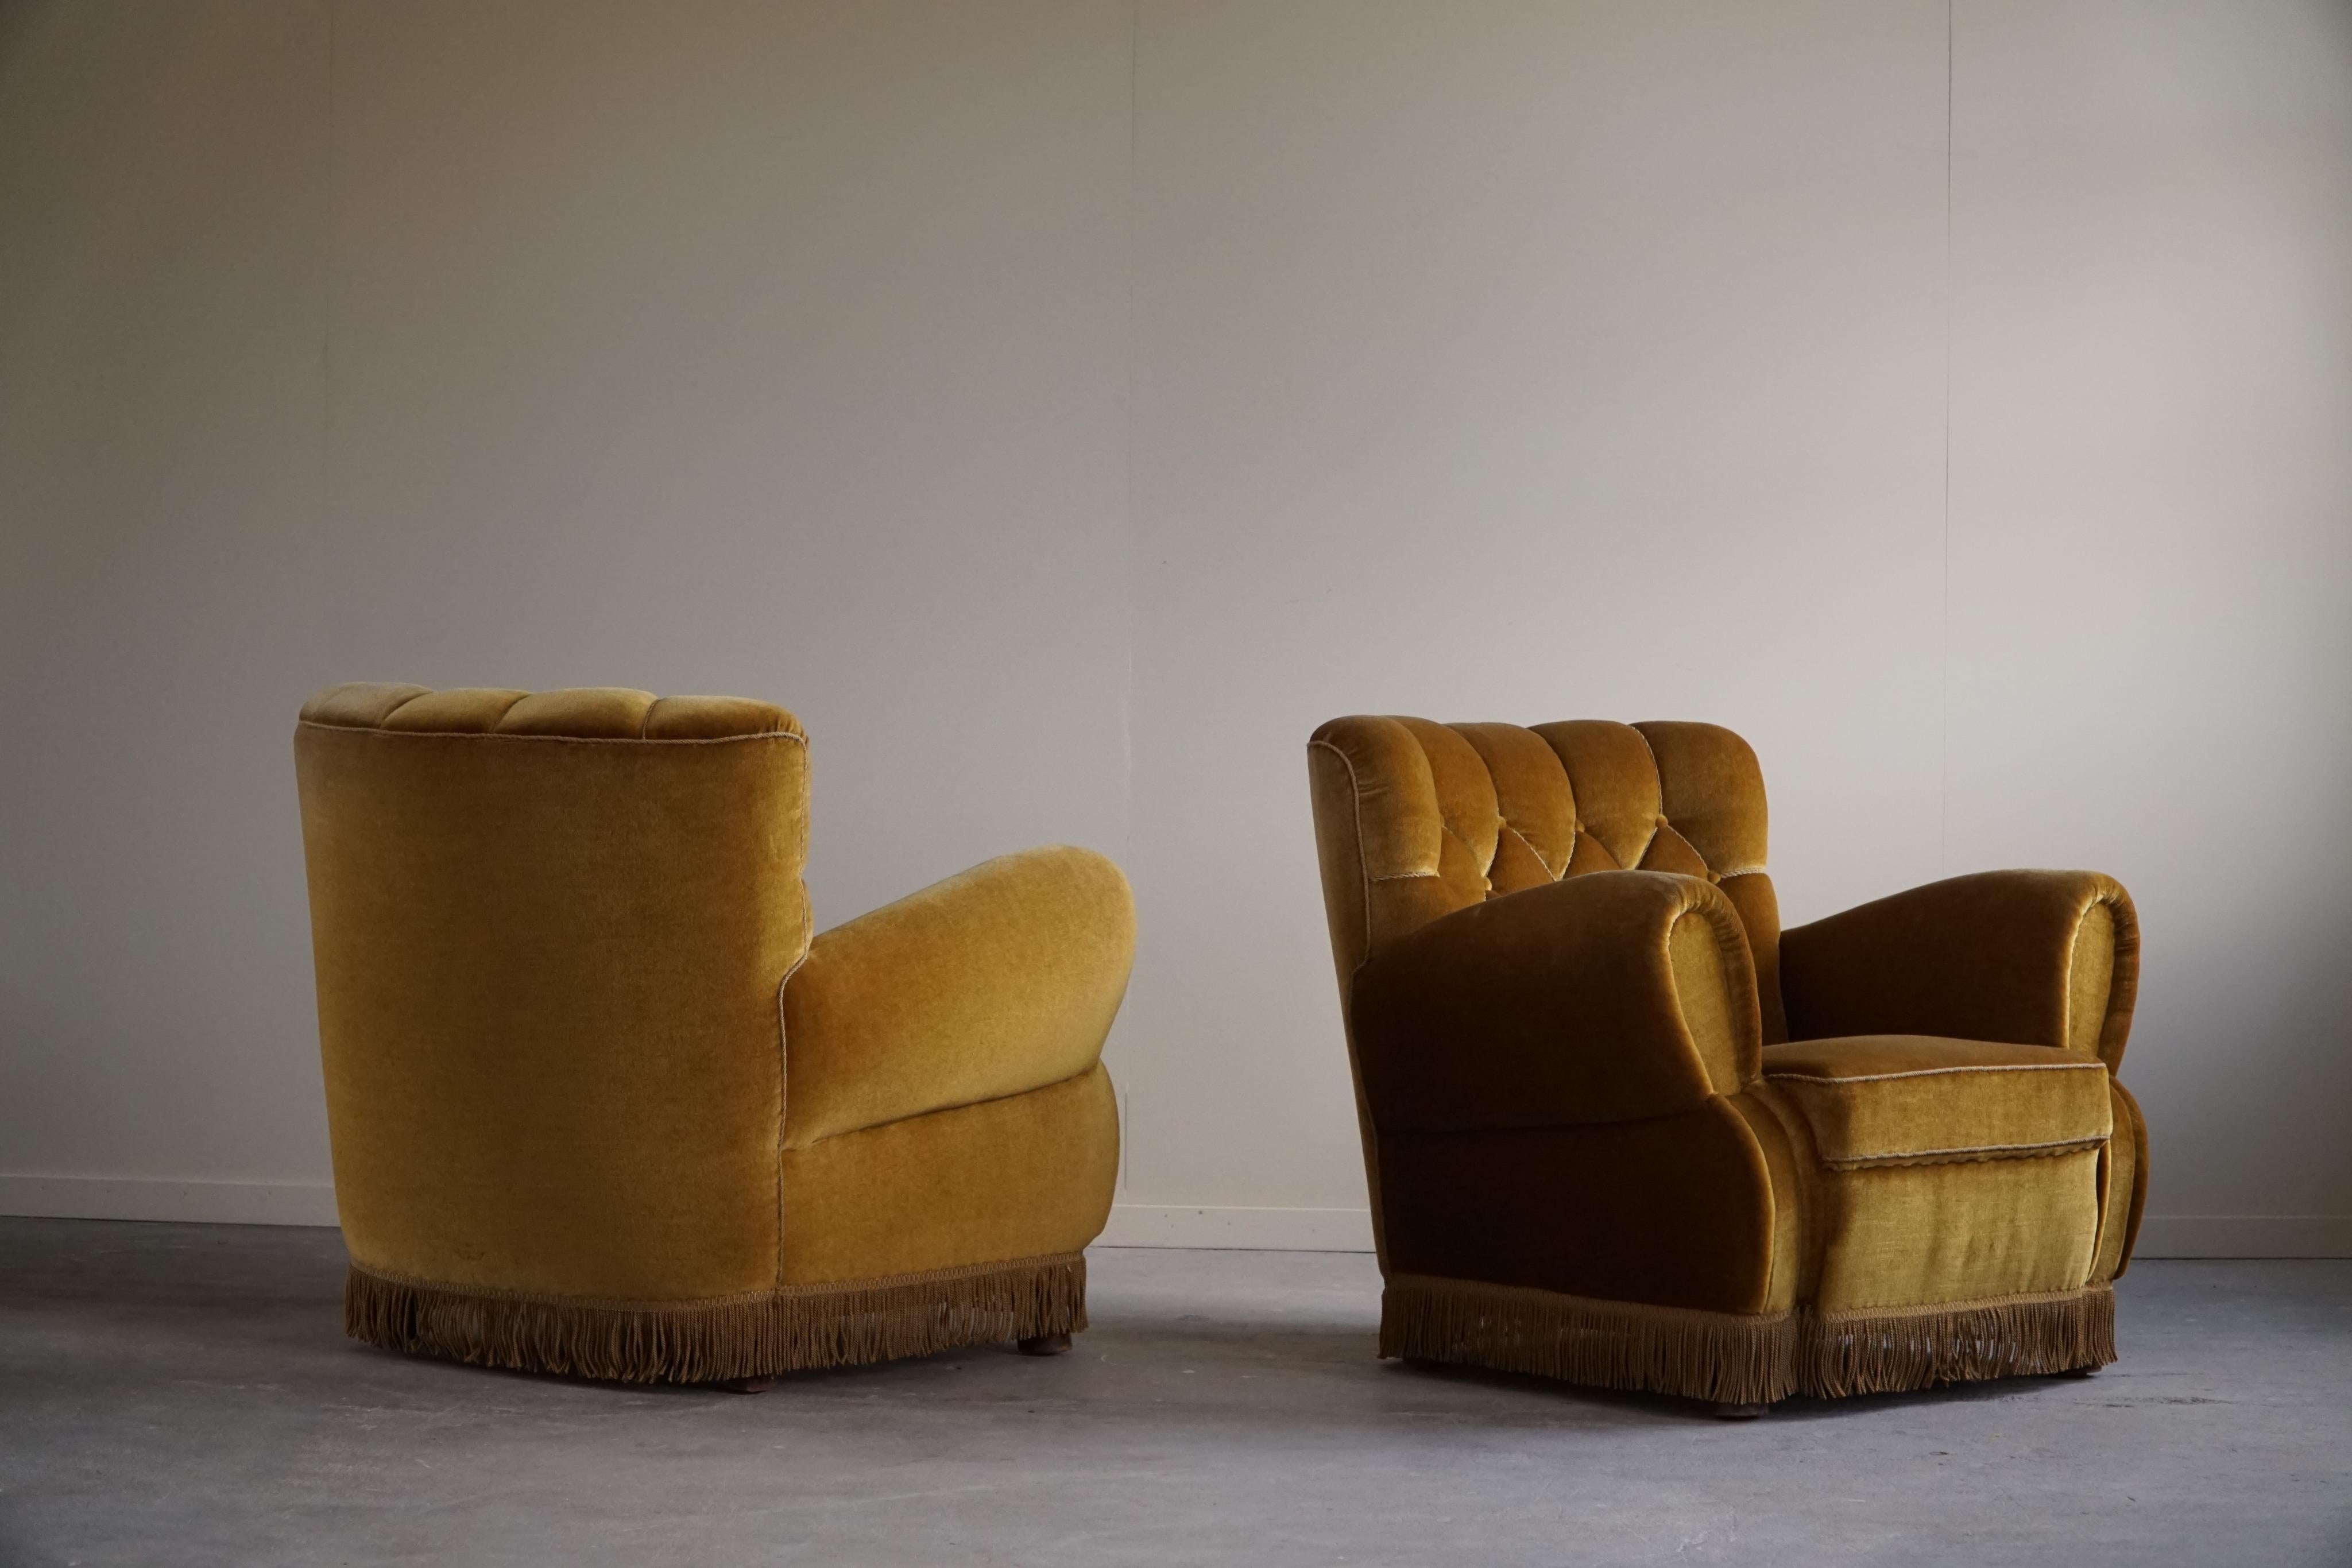 Scandinavian Modern A Pair of Art Deco Lounge Chairs in Yellow Velour, Danish Carbinetmaker, 1940s For Sale